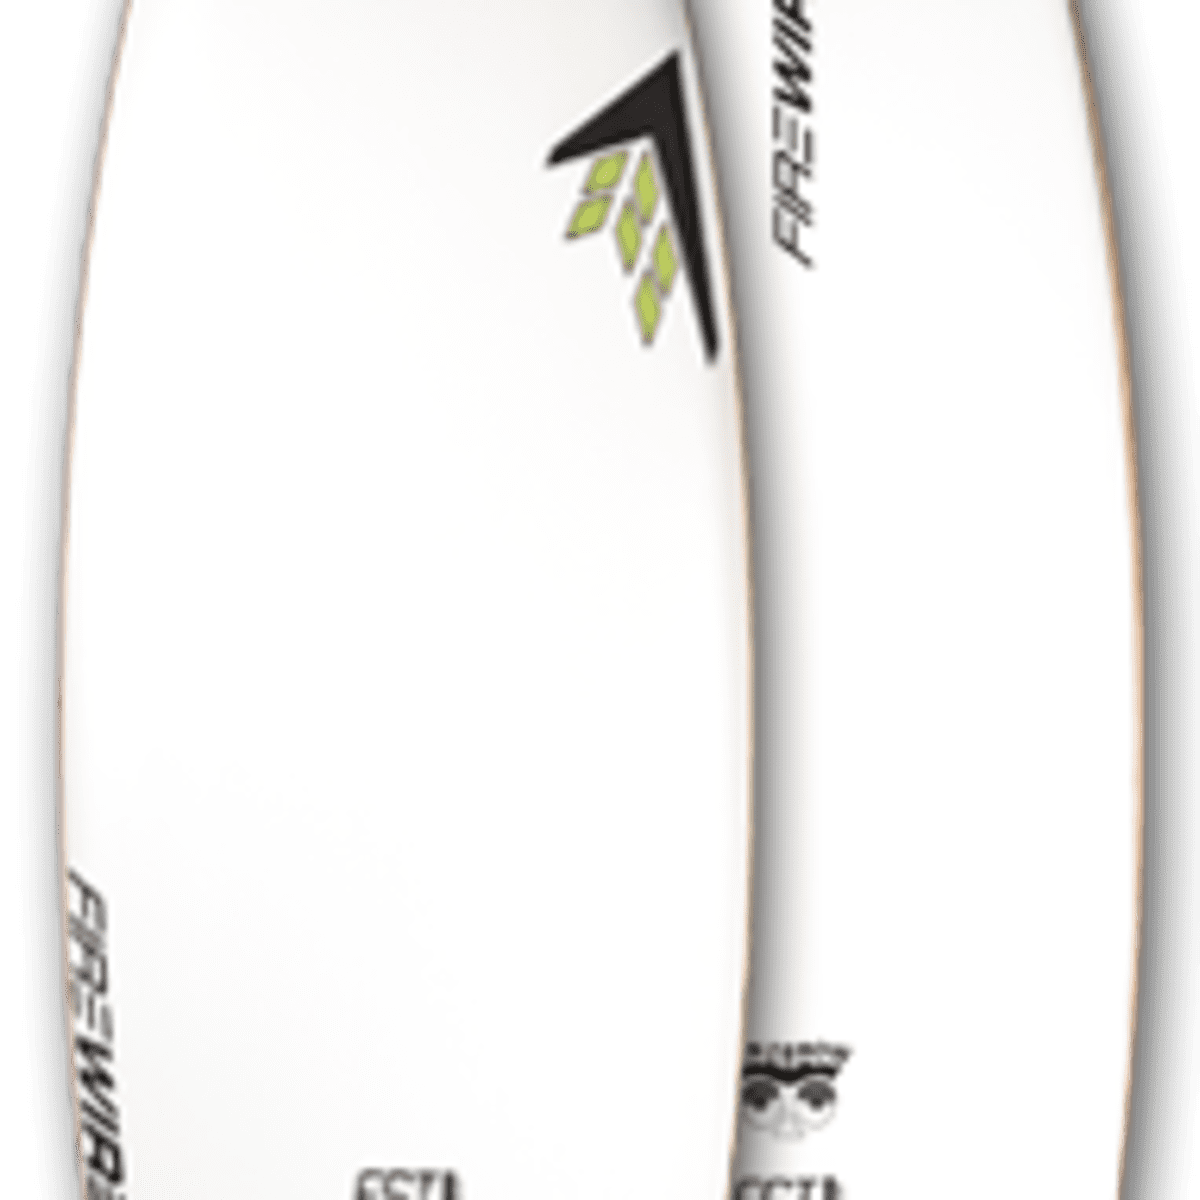 Firewire Launches the Unibrow Model - Surfer